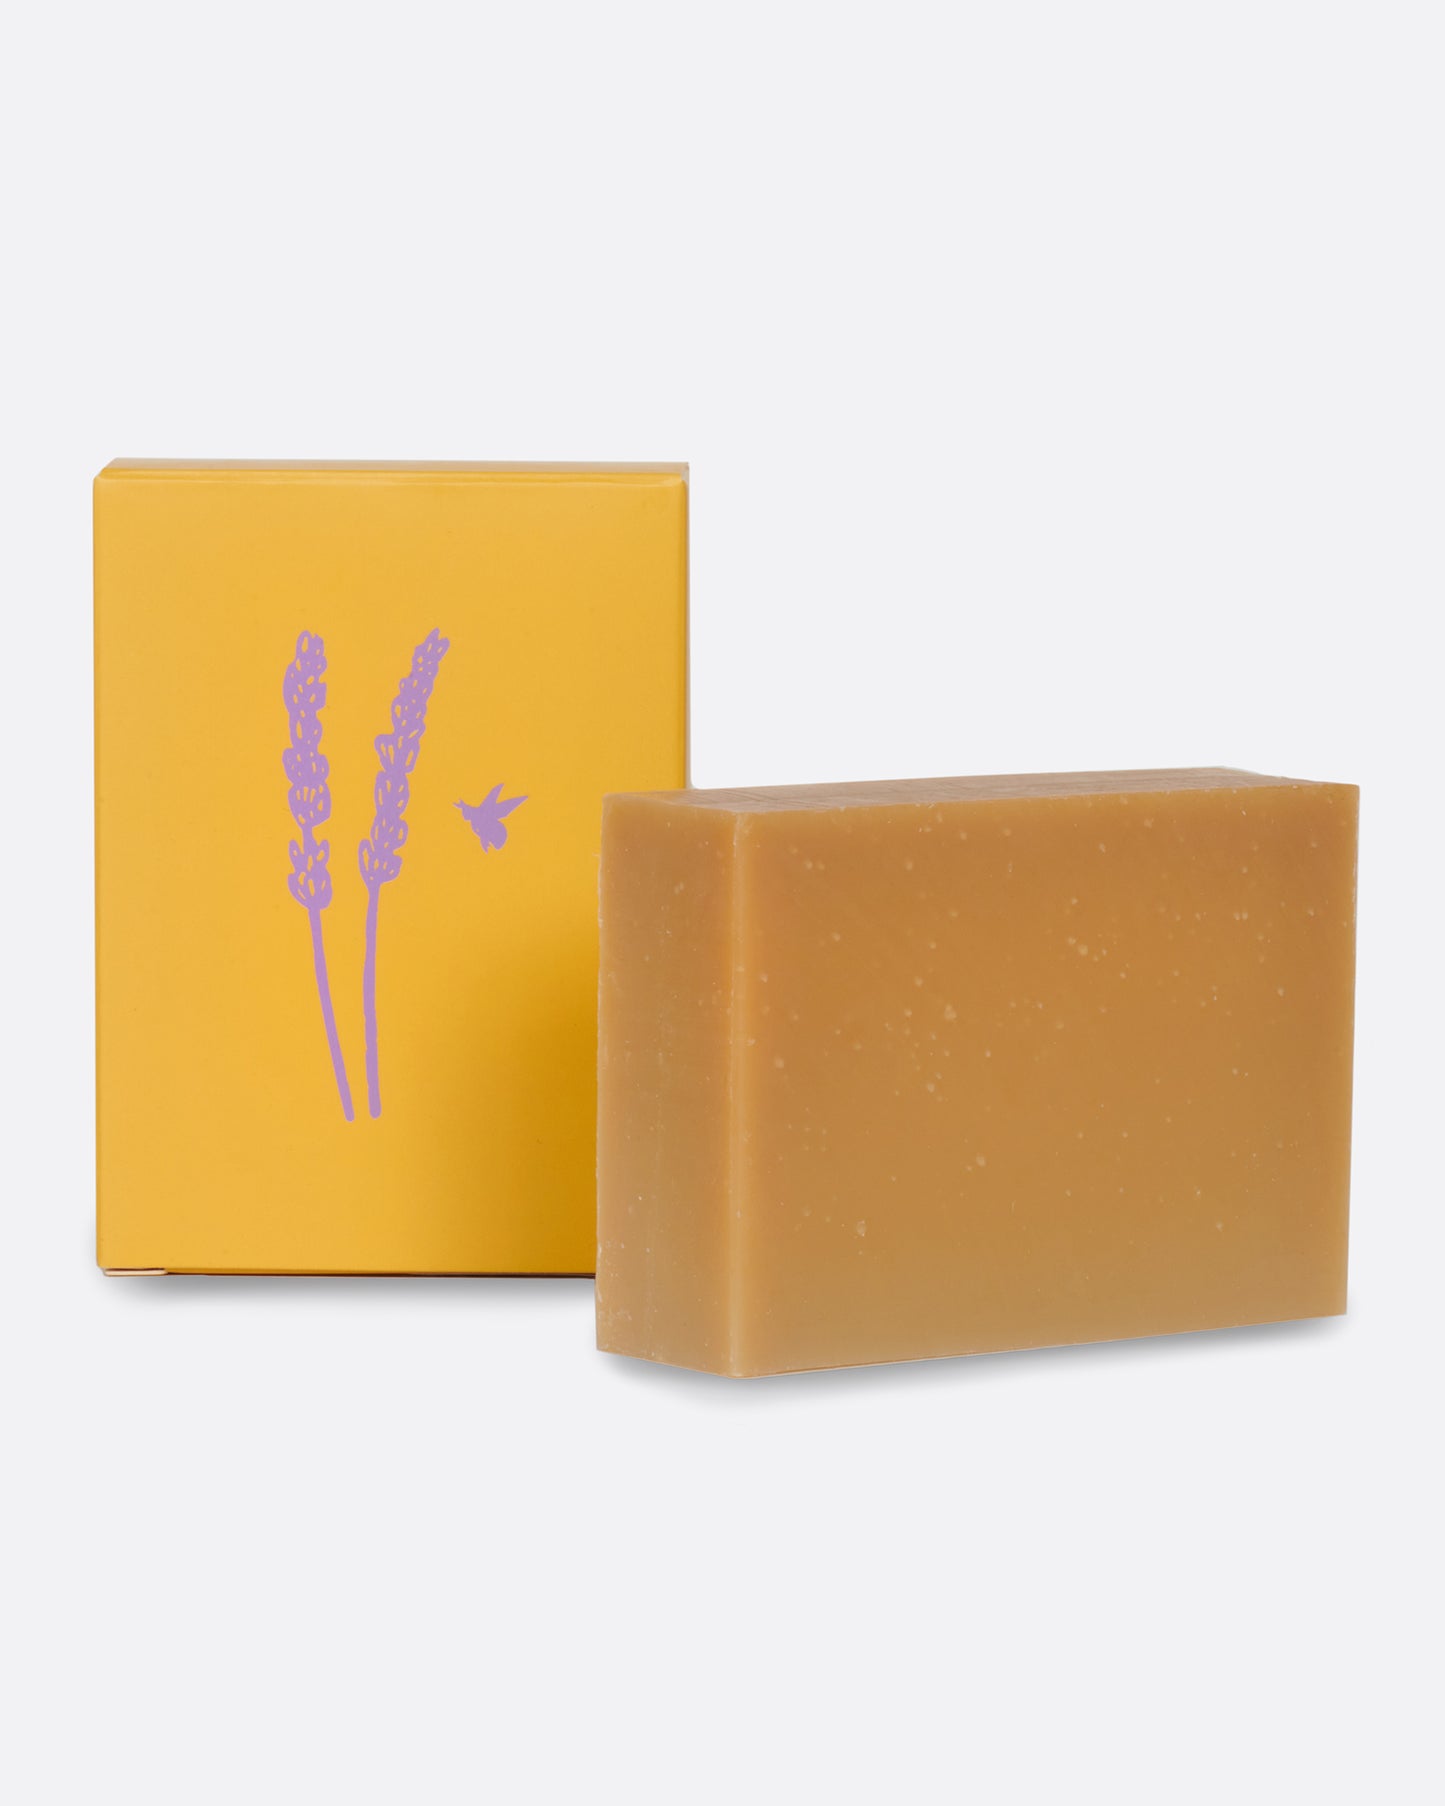 Ingredients like lavender tea, made from locally harvested sprigs, and honey, mixed in right before saponification, help boost the benefits of this healing soap.